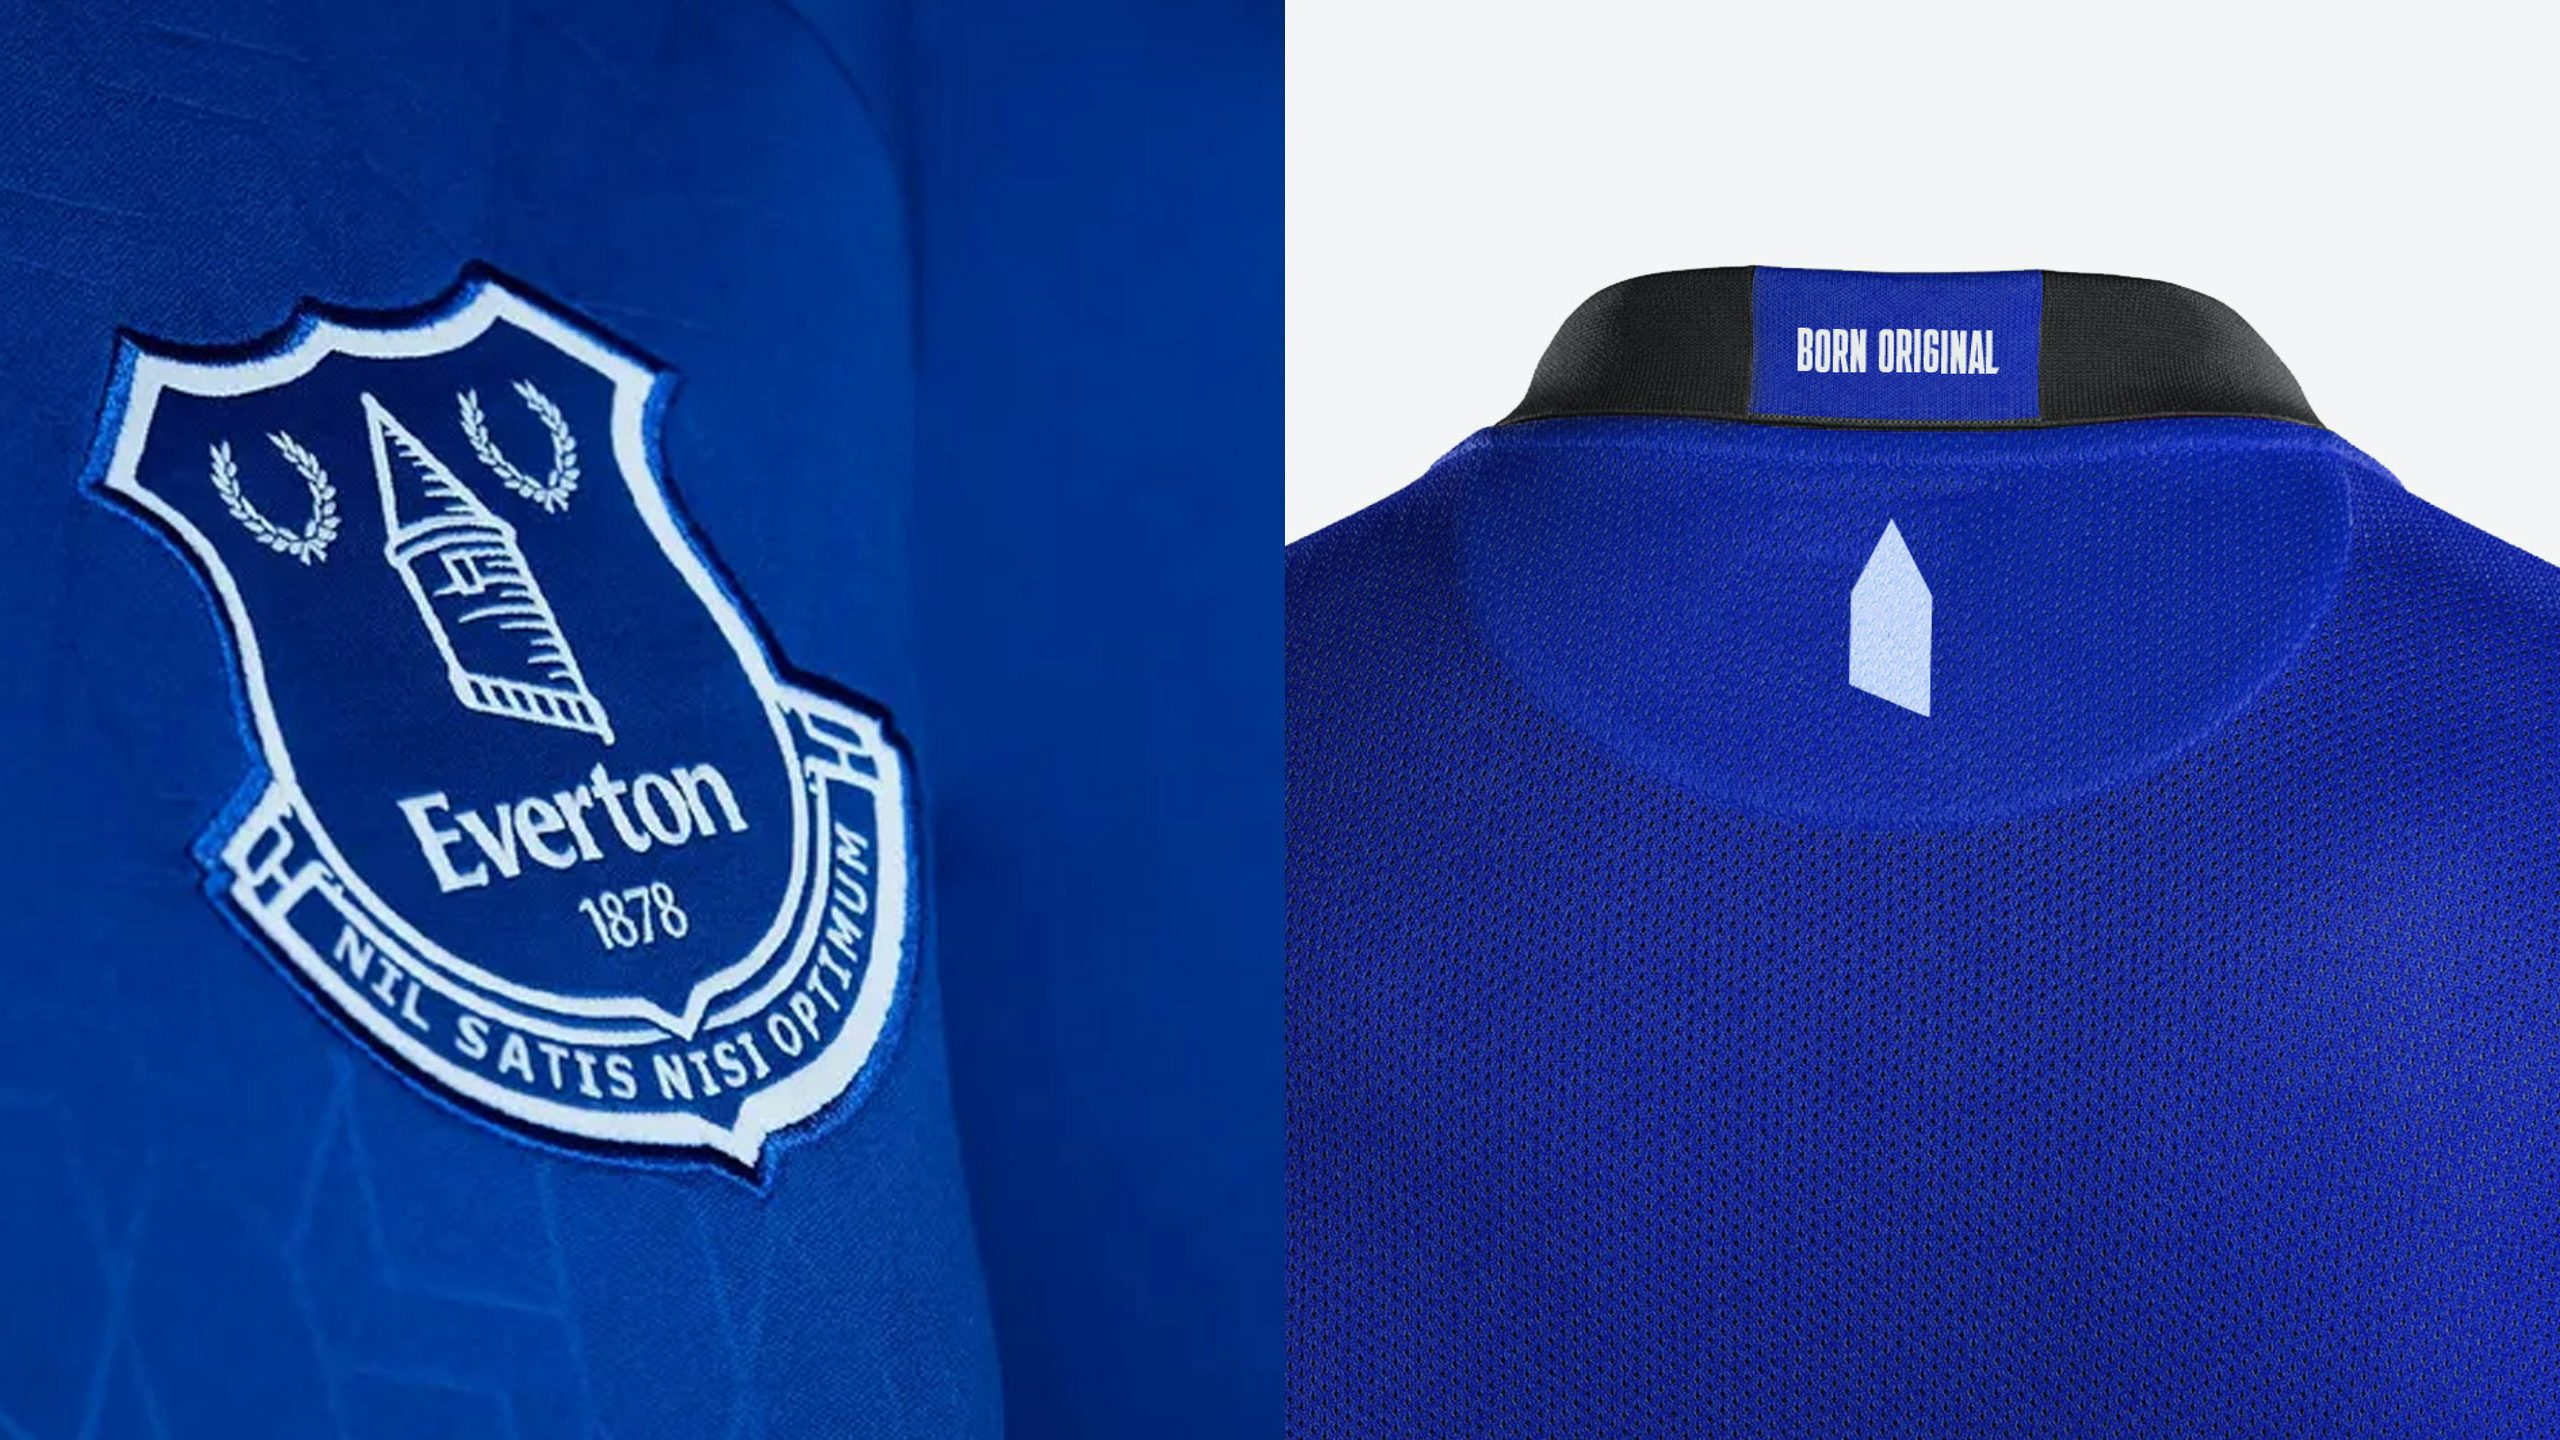 Photograph of the Everton football club crest and the reverse of the shirt with the angular icon